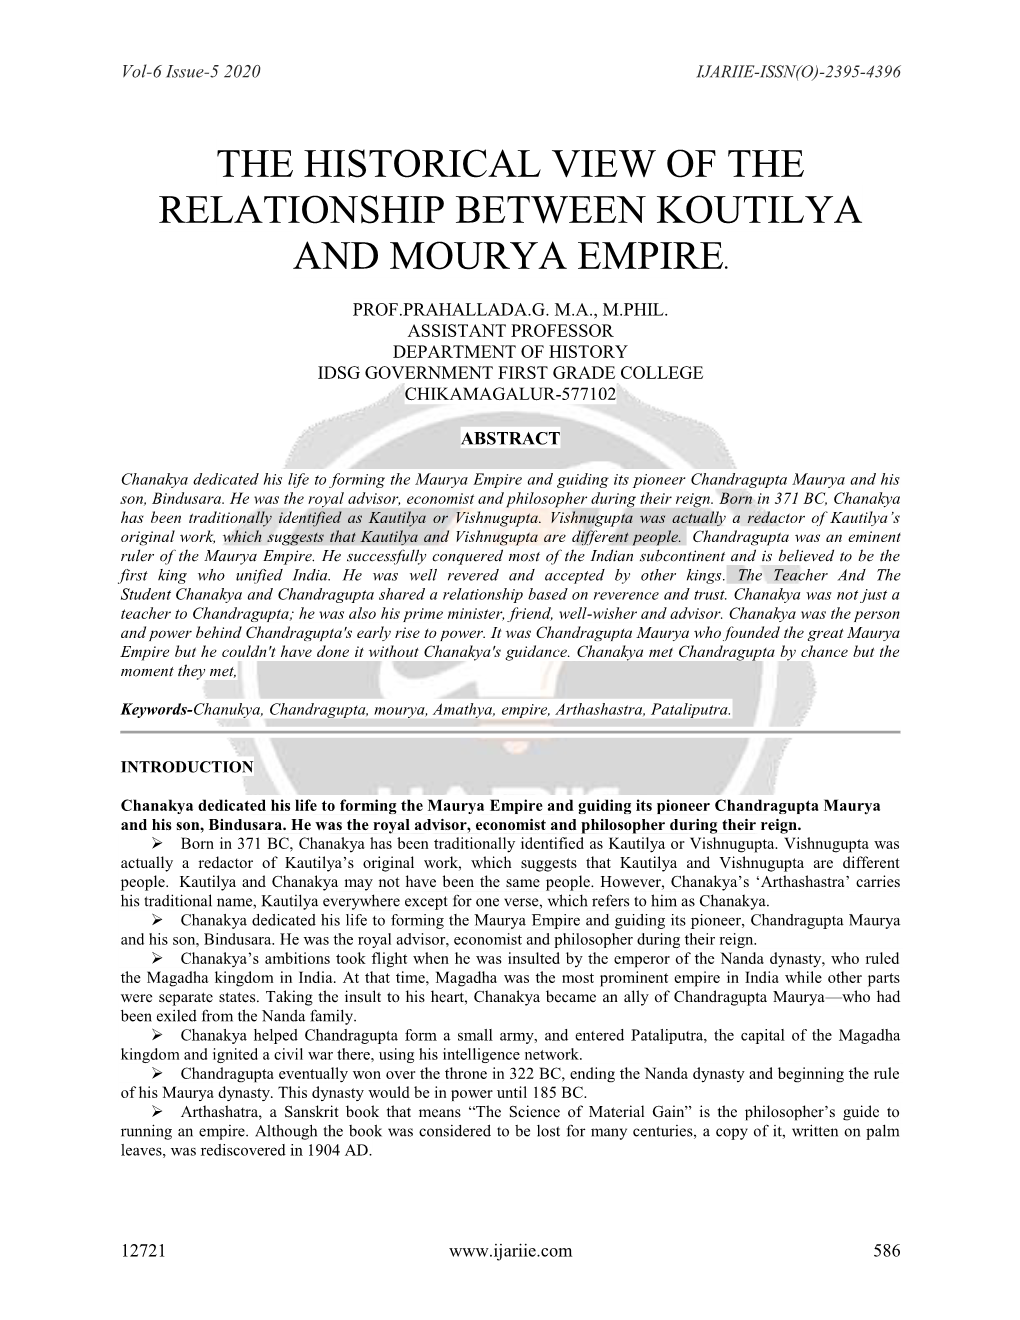 The Historical View of the Relationship Between Koutilya and Mourya Empire